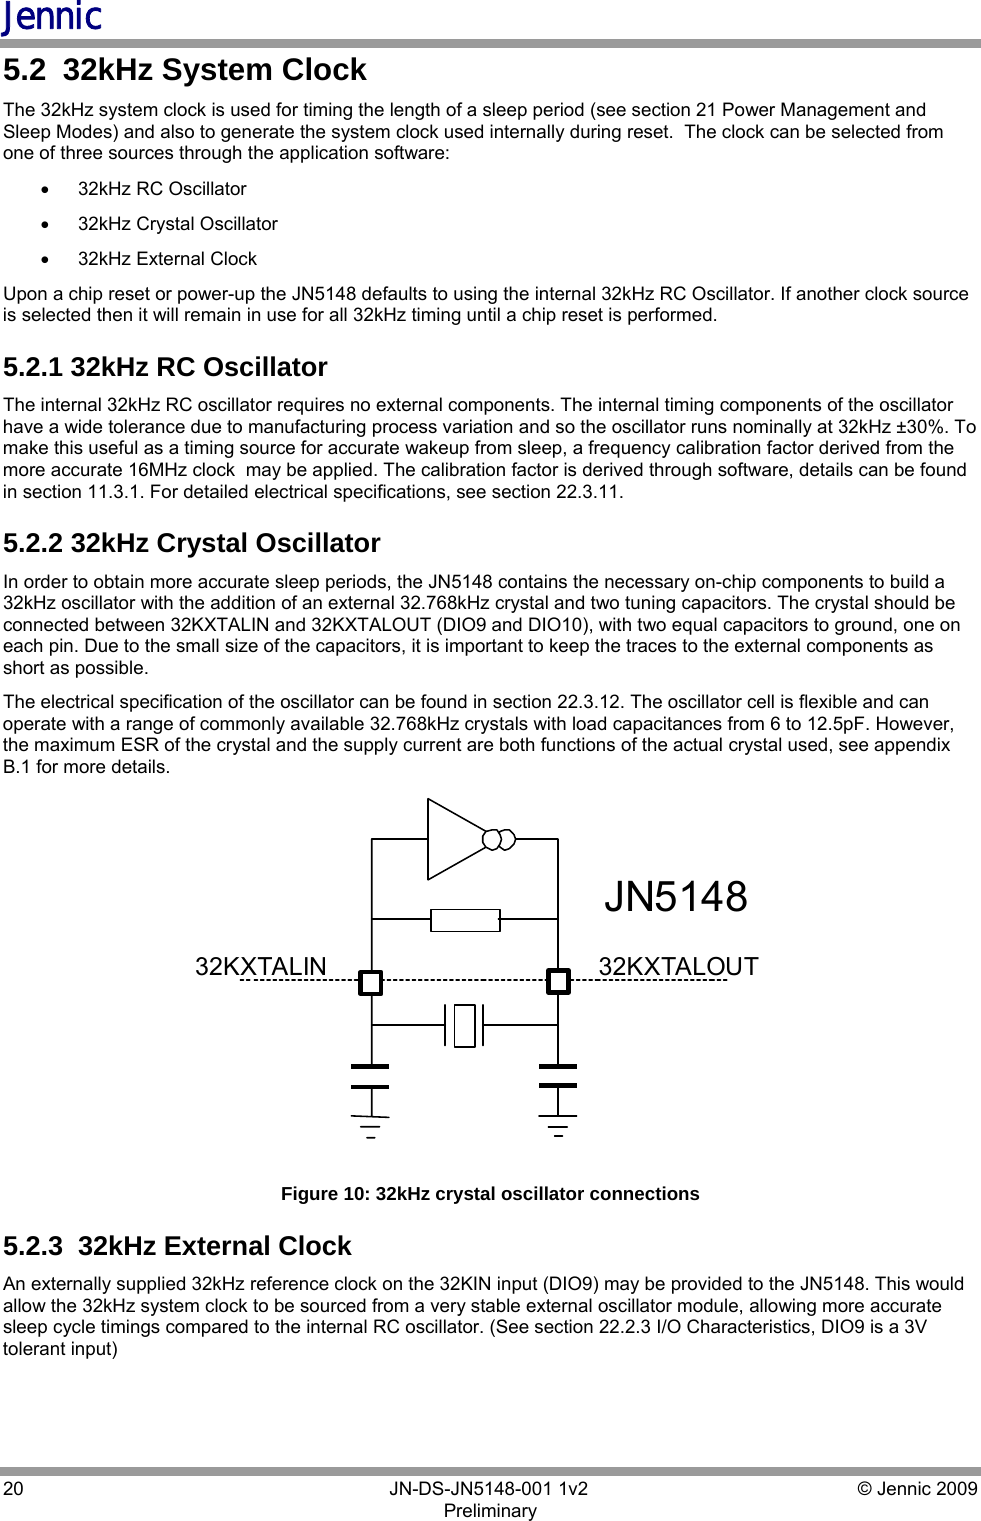 Jennic 20        JN-DS-JN5148-001 1v2  © Jennic 2009 Preliminary  5.2  32kHz System Clock The 32kHz system clock is used for timing the length of a sleep period (see section 21 Power Management and Sleep Modes) and also to generate the system clock used internally during reset.  The clock can be selected from one of three sources through the application software: •  32kHz RC Oscillator •  32kHz Crystal Oscillator •  32kHz External Clock Upon a chip reset or power-up the JN5148 defaults to using the internal 32kHz RC Oscillator. If another clock source is selected then it will remain in use for all 32kHz timing until a chip reset is performed. 5.2.1 32kHz RC Oscillator The internal 32kHz RC oscillator requires no external components. The internal timing components of the oscillator have a wide tolerance due to manufacturing process variation and so the oscillator runs nominally at 32kHz ±30%. To make this useful as a timing source for accurate wakeup from sleep, a frequency calibration factor derived from the more accurate 16MHz clock  may be applied. The calibration factor is derived through software, details can be found in section 11.3.1. For detailed electrical specifications, see section 22.3.11. 5.2.2 32kHz Crystal Oscillator In order to obtain more accurate sleep periods, the JN5148 contains the necessary on-chip components to build a 32kHz oscillator with the addition of an external 32.768kHz crystal and two tuning capacitors. The crystal should be connected between 32KXTALIN and 32KXTALOUT (DIO9 and DIO10), with two equal capacitors to ground, one on each pin. Due to the small size of the capacitors, it is important to keep the traces to the external components as short as possible. The electrical specification of the oscillator can be found in section 22.3.12. The oscillator cell is flexible and can operate with a range of commonly available 32.768kHz crystals with load capacitances from 6 to 12.5pF. However, the maximum ESR of the crystal and the supply current are both functions of the actual crystal used, see appendix B.1 for more details. 32KXTALOUT 32KXTALIN JN5148  Figure 10: 32kHz crystal oscillator connections 5.2.3  32kHz External Clock An externally supplied 32kHz reference clock on the 32KIN input (DIO9) may be provided to the JN5148. This would allow the 32kHz system clock to be sourced from a very stable external oscillator module, allowing more accurate sleep cycle timings compared to the internal RC oscillator. (See section 22.2.3 I/O Characteristics, DIO9 is a 3V tolerant input) 